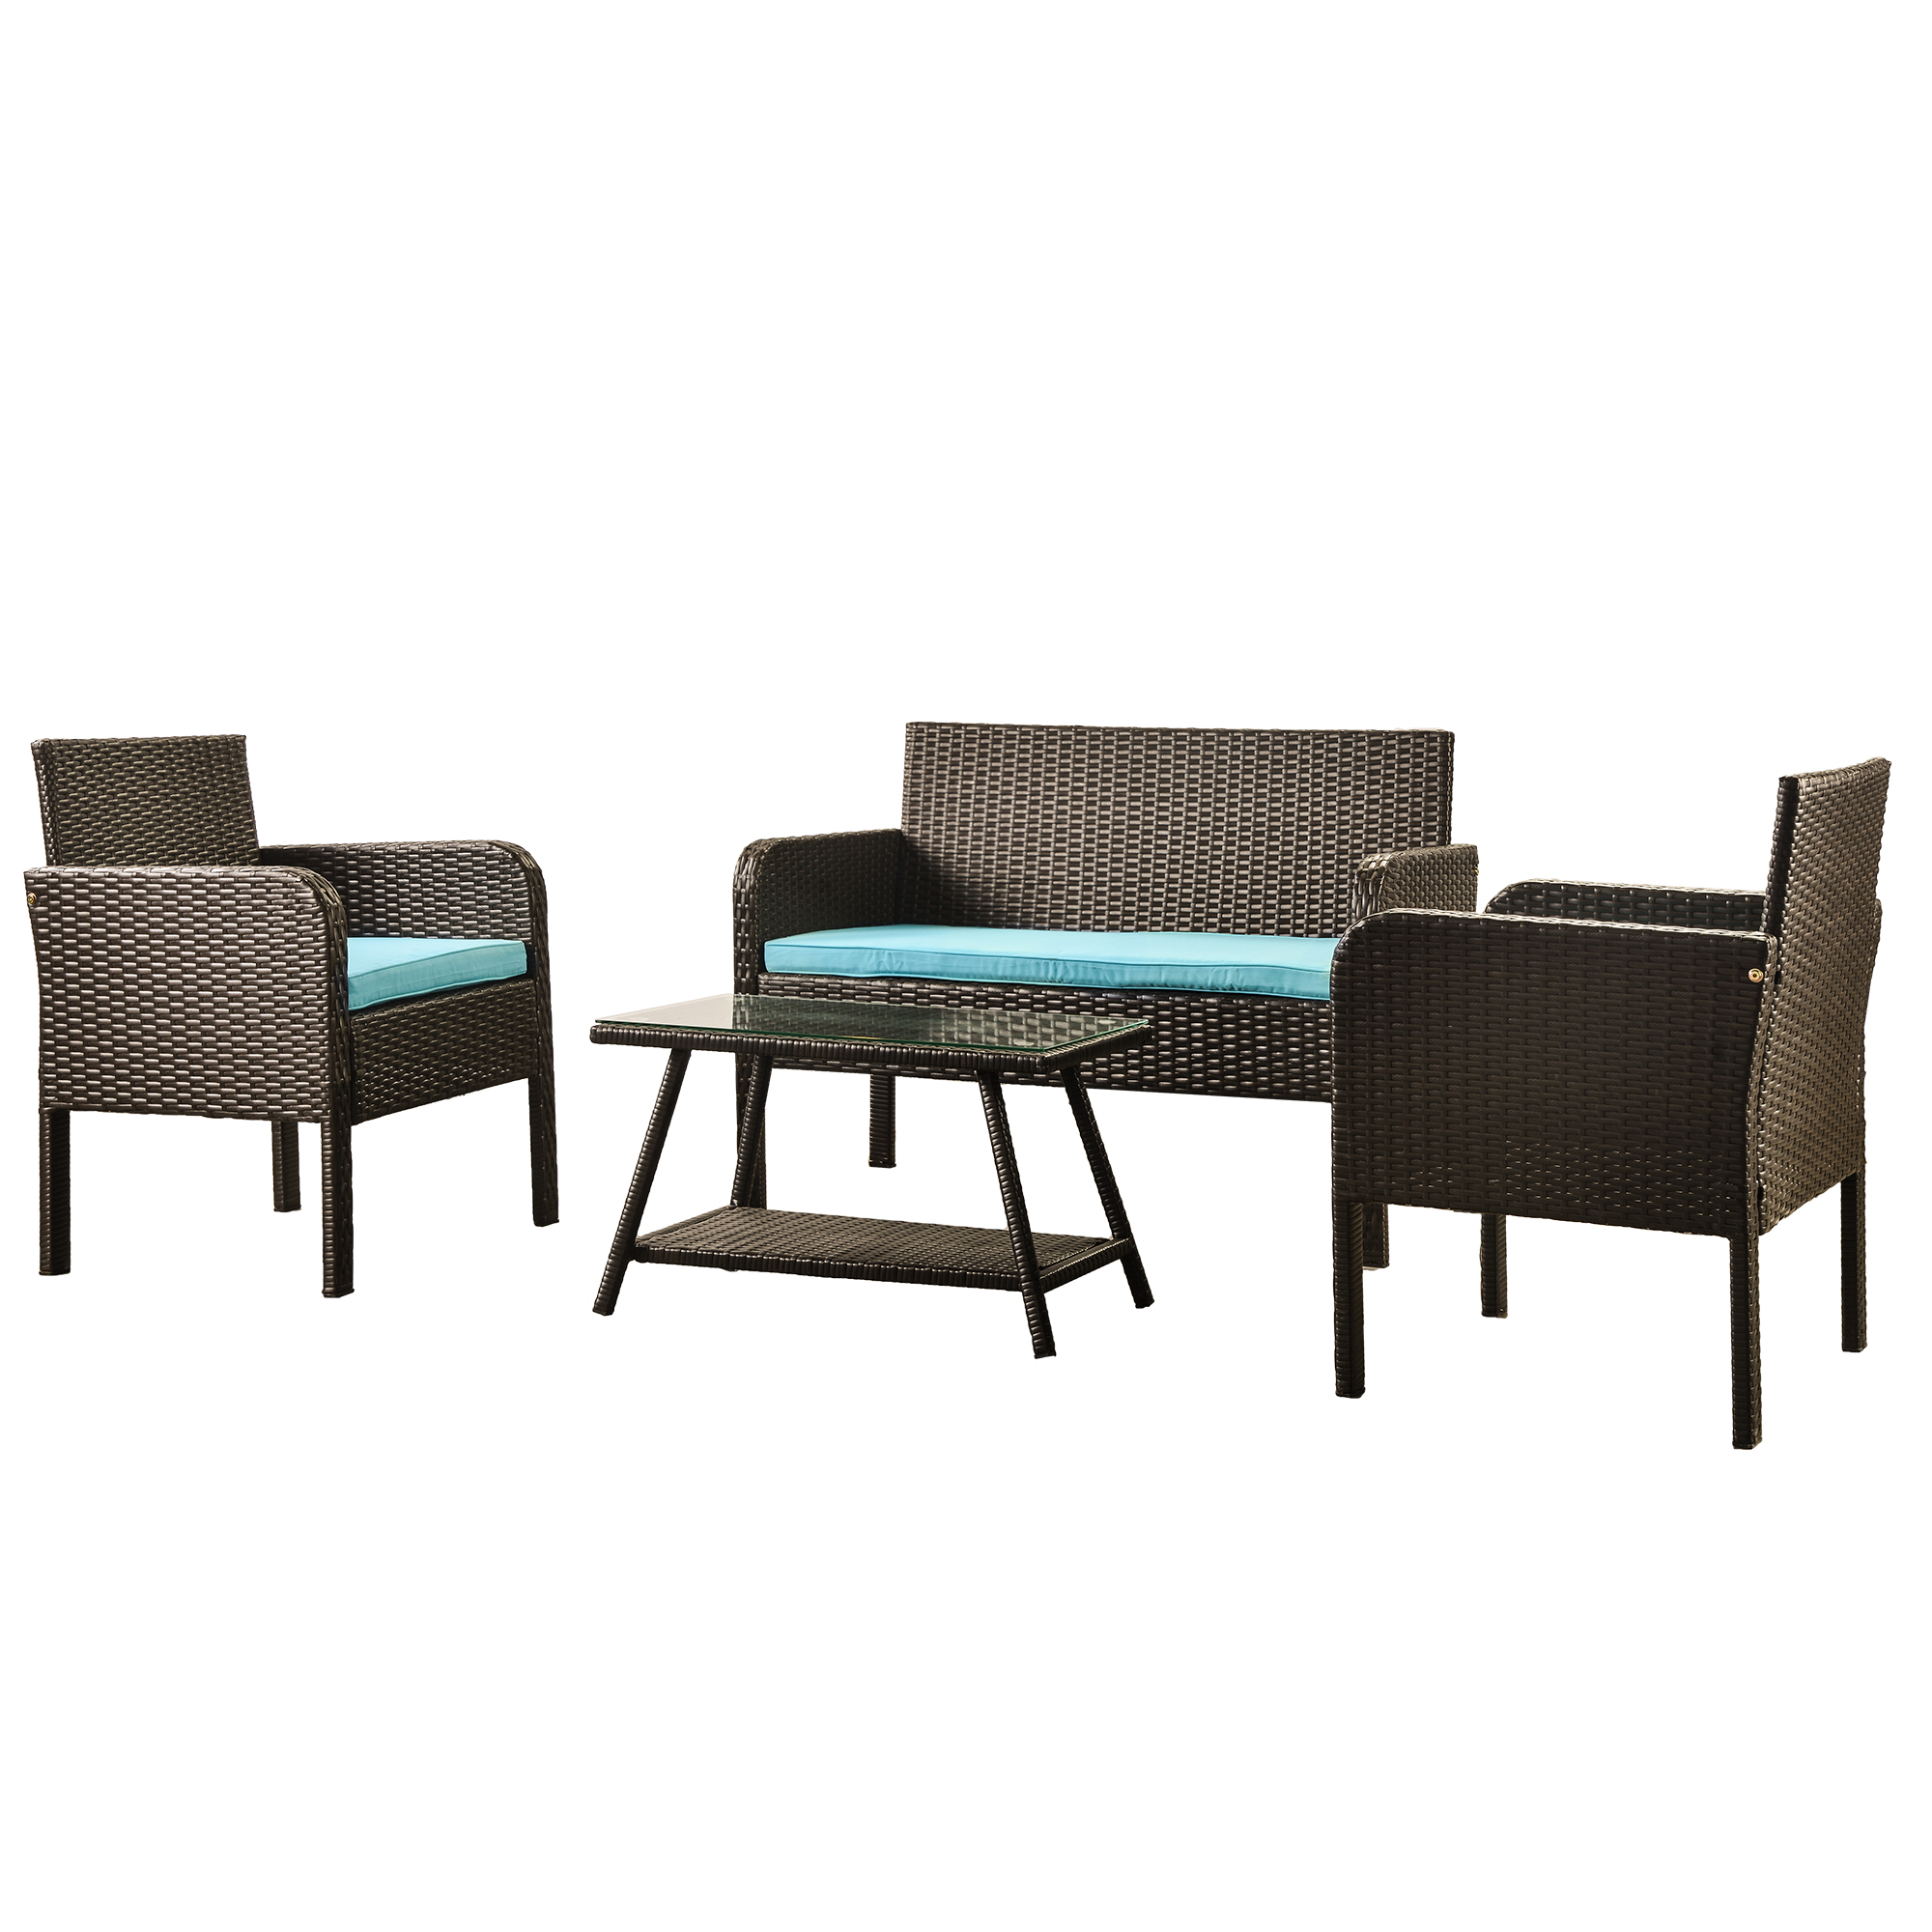 enyopro Patio Furniture Sets, 4 Pieces Outdoor Rattan Sofa Wicker Furniture Set, All-Weather Wicker Sectional Set with Table Conshions, Patio Conversation Set, Ideal for Garden Poolside Lawn, B302 - image 1 of 7